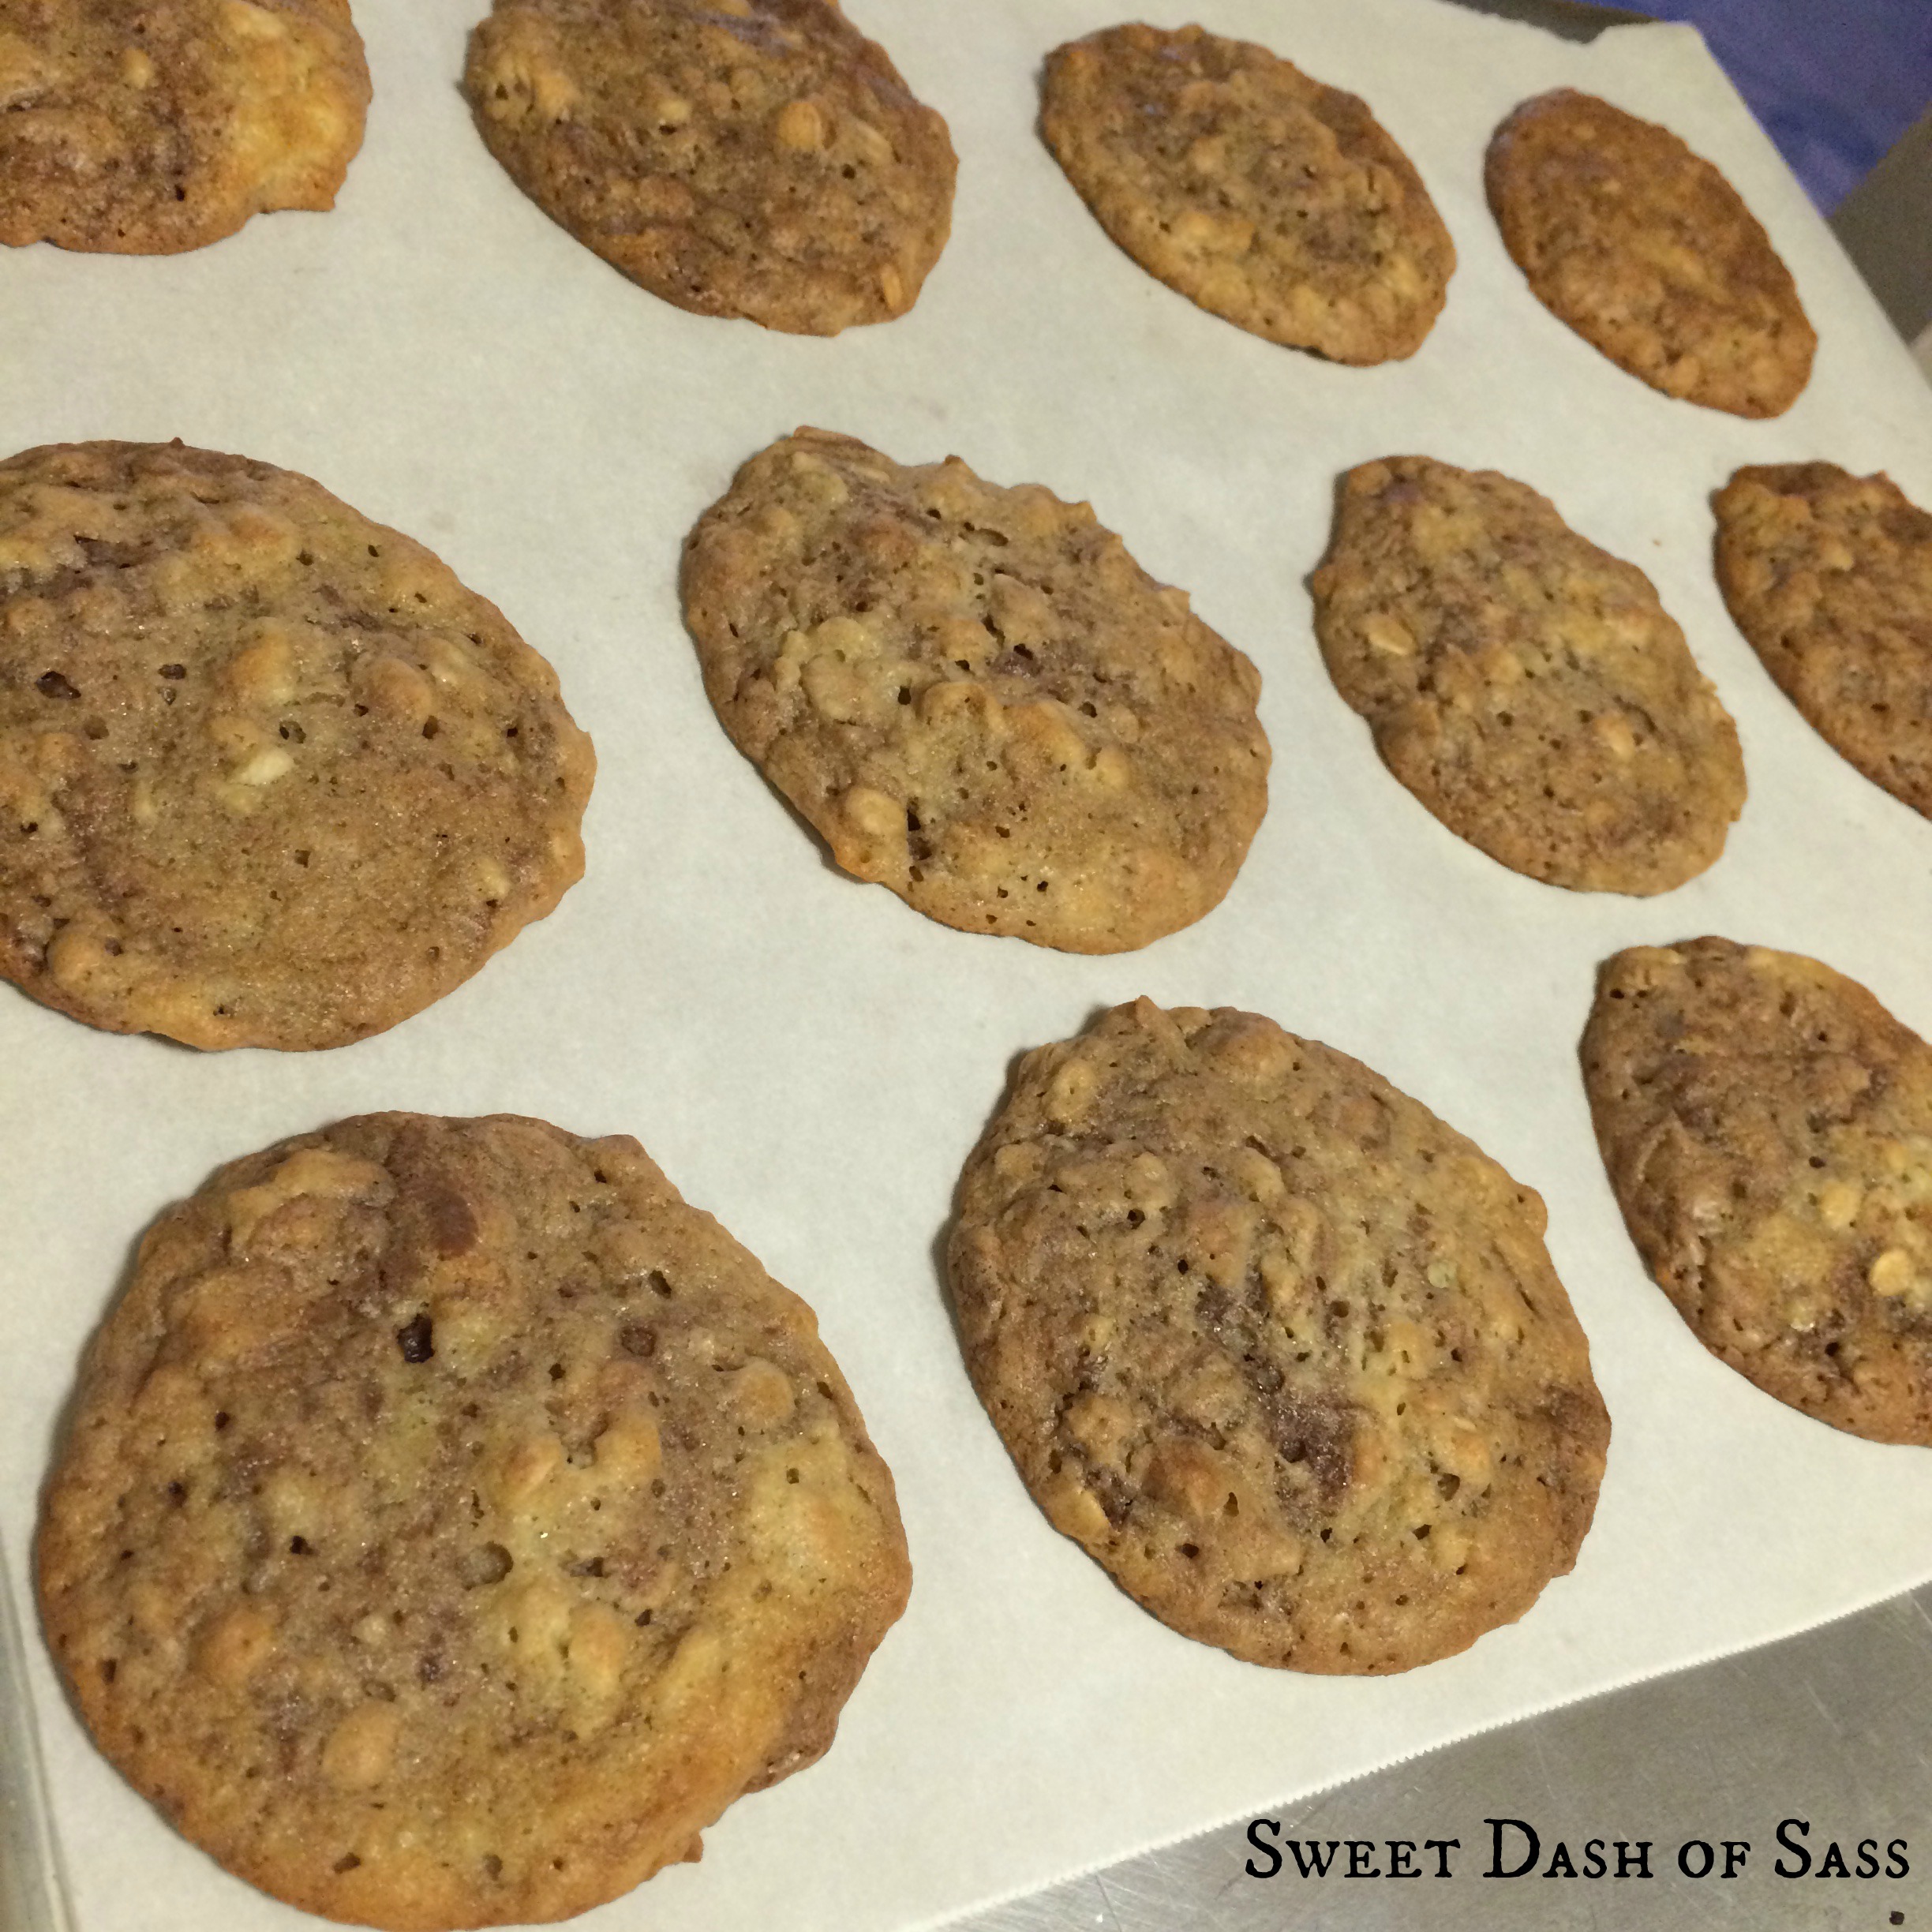 Banana Nutella Cookies -- These were a fan favorite this holiday season.  #25DaysCookieStyle www.SweetDashofSass.com